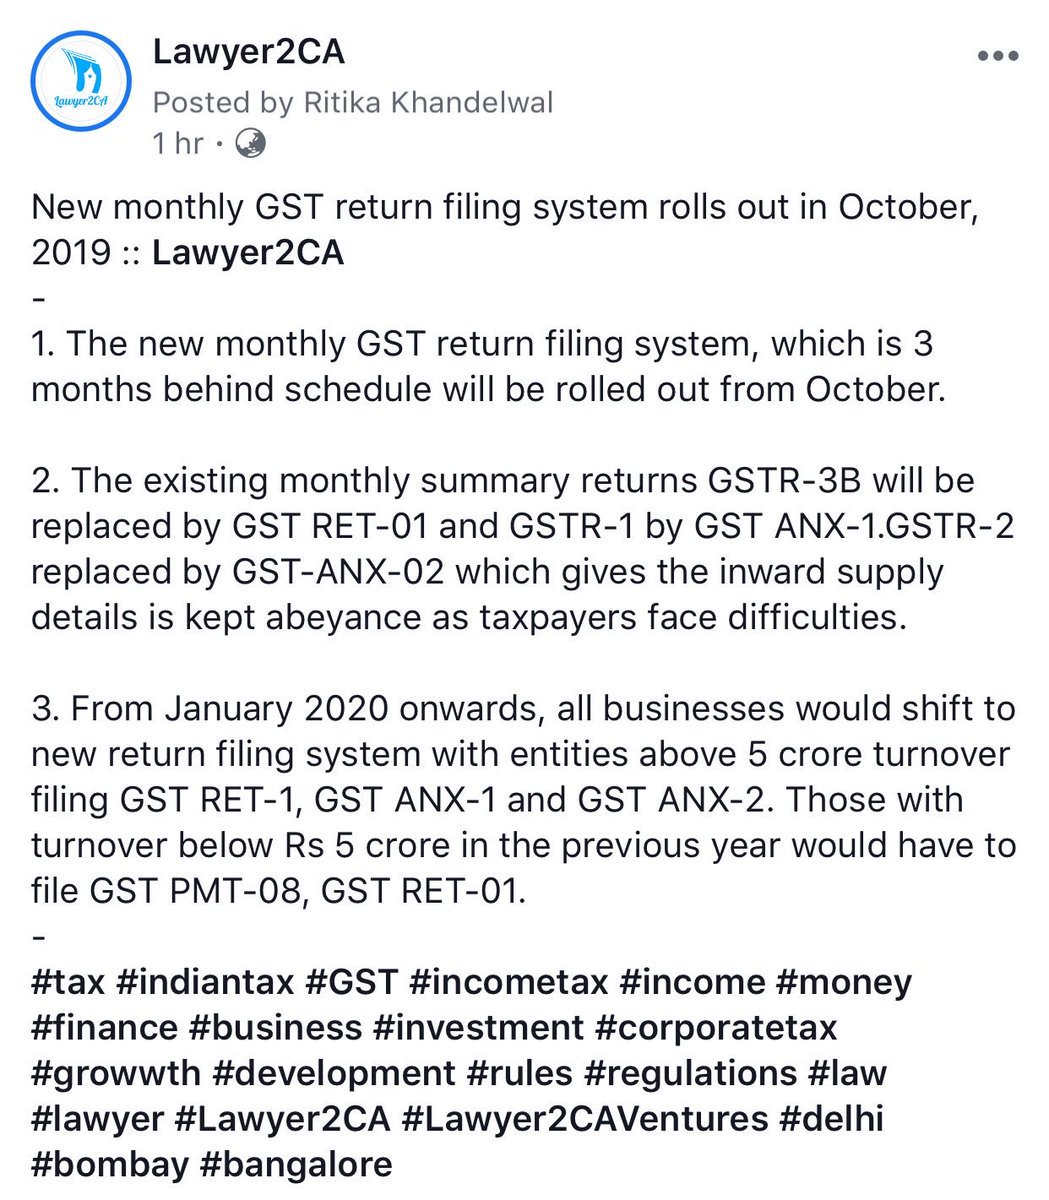 New monthly GST return filing system rolls out in October,2019 :: @Lawyer2CA 
-
#tax #indiantax #GST #incometax #income #money #finance #business #investment #corporatetax #growwth #development #rules #regulations #law #lawyer #Lawyer2CA #Lawyer2CAVentures #delhi #bombay